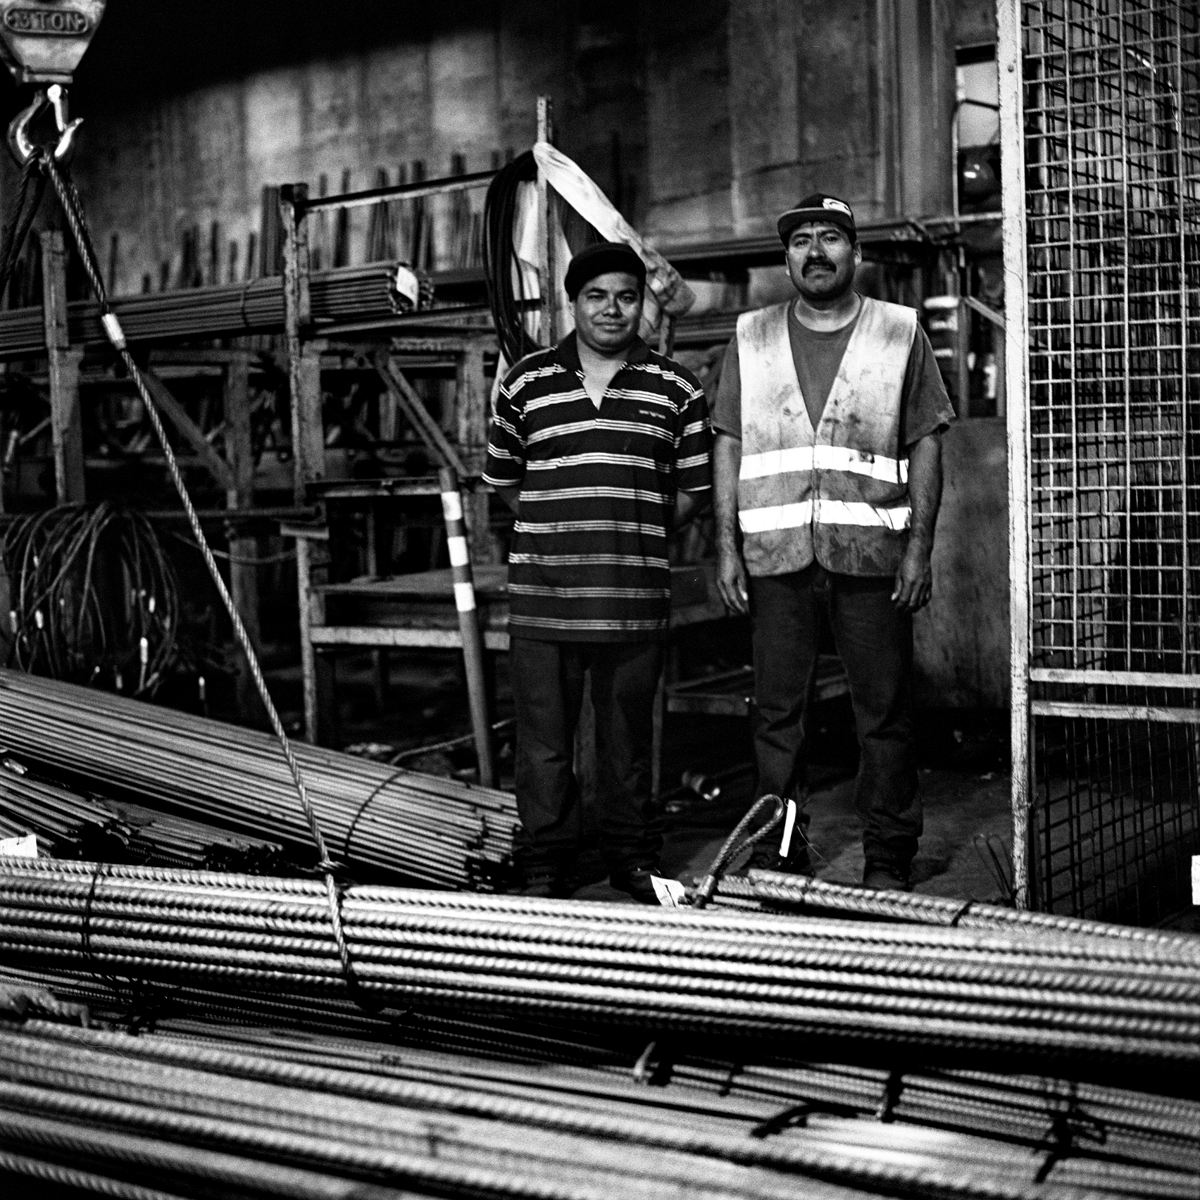  Coworkers inside a rebar fabrication plant with several thousand pounds of rebar awaiting to be manipulated into different shapes and designs for construction projects.  Williamsburg, Brooklyn, N.Y. (Oct. 2015) 